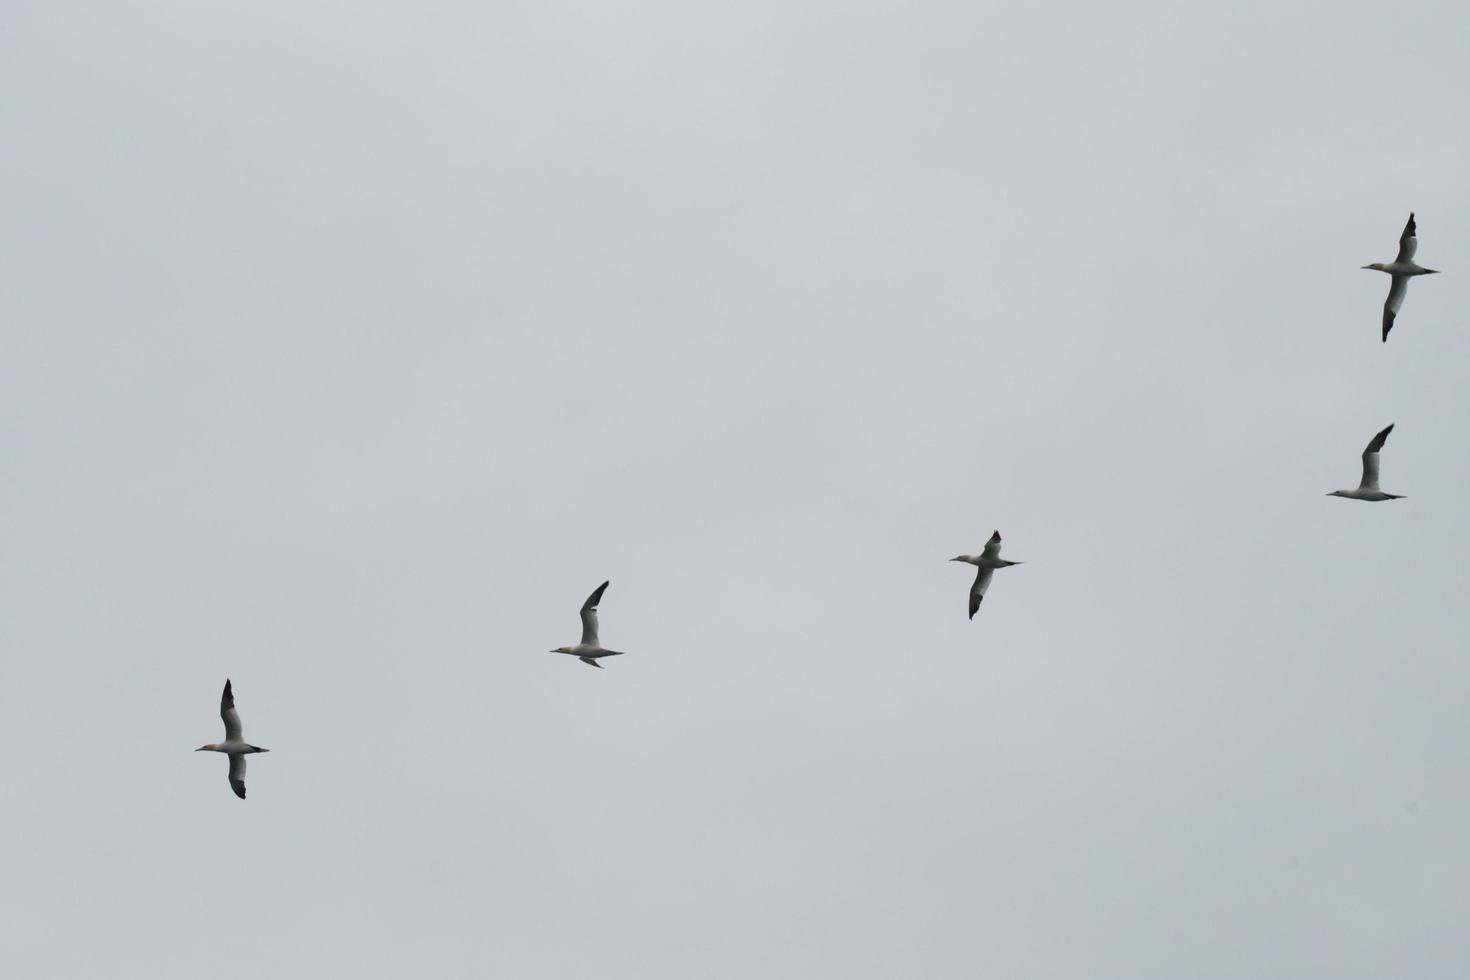 Group of five northern gannet flying in a cloudy sky photo